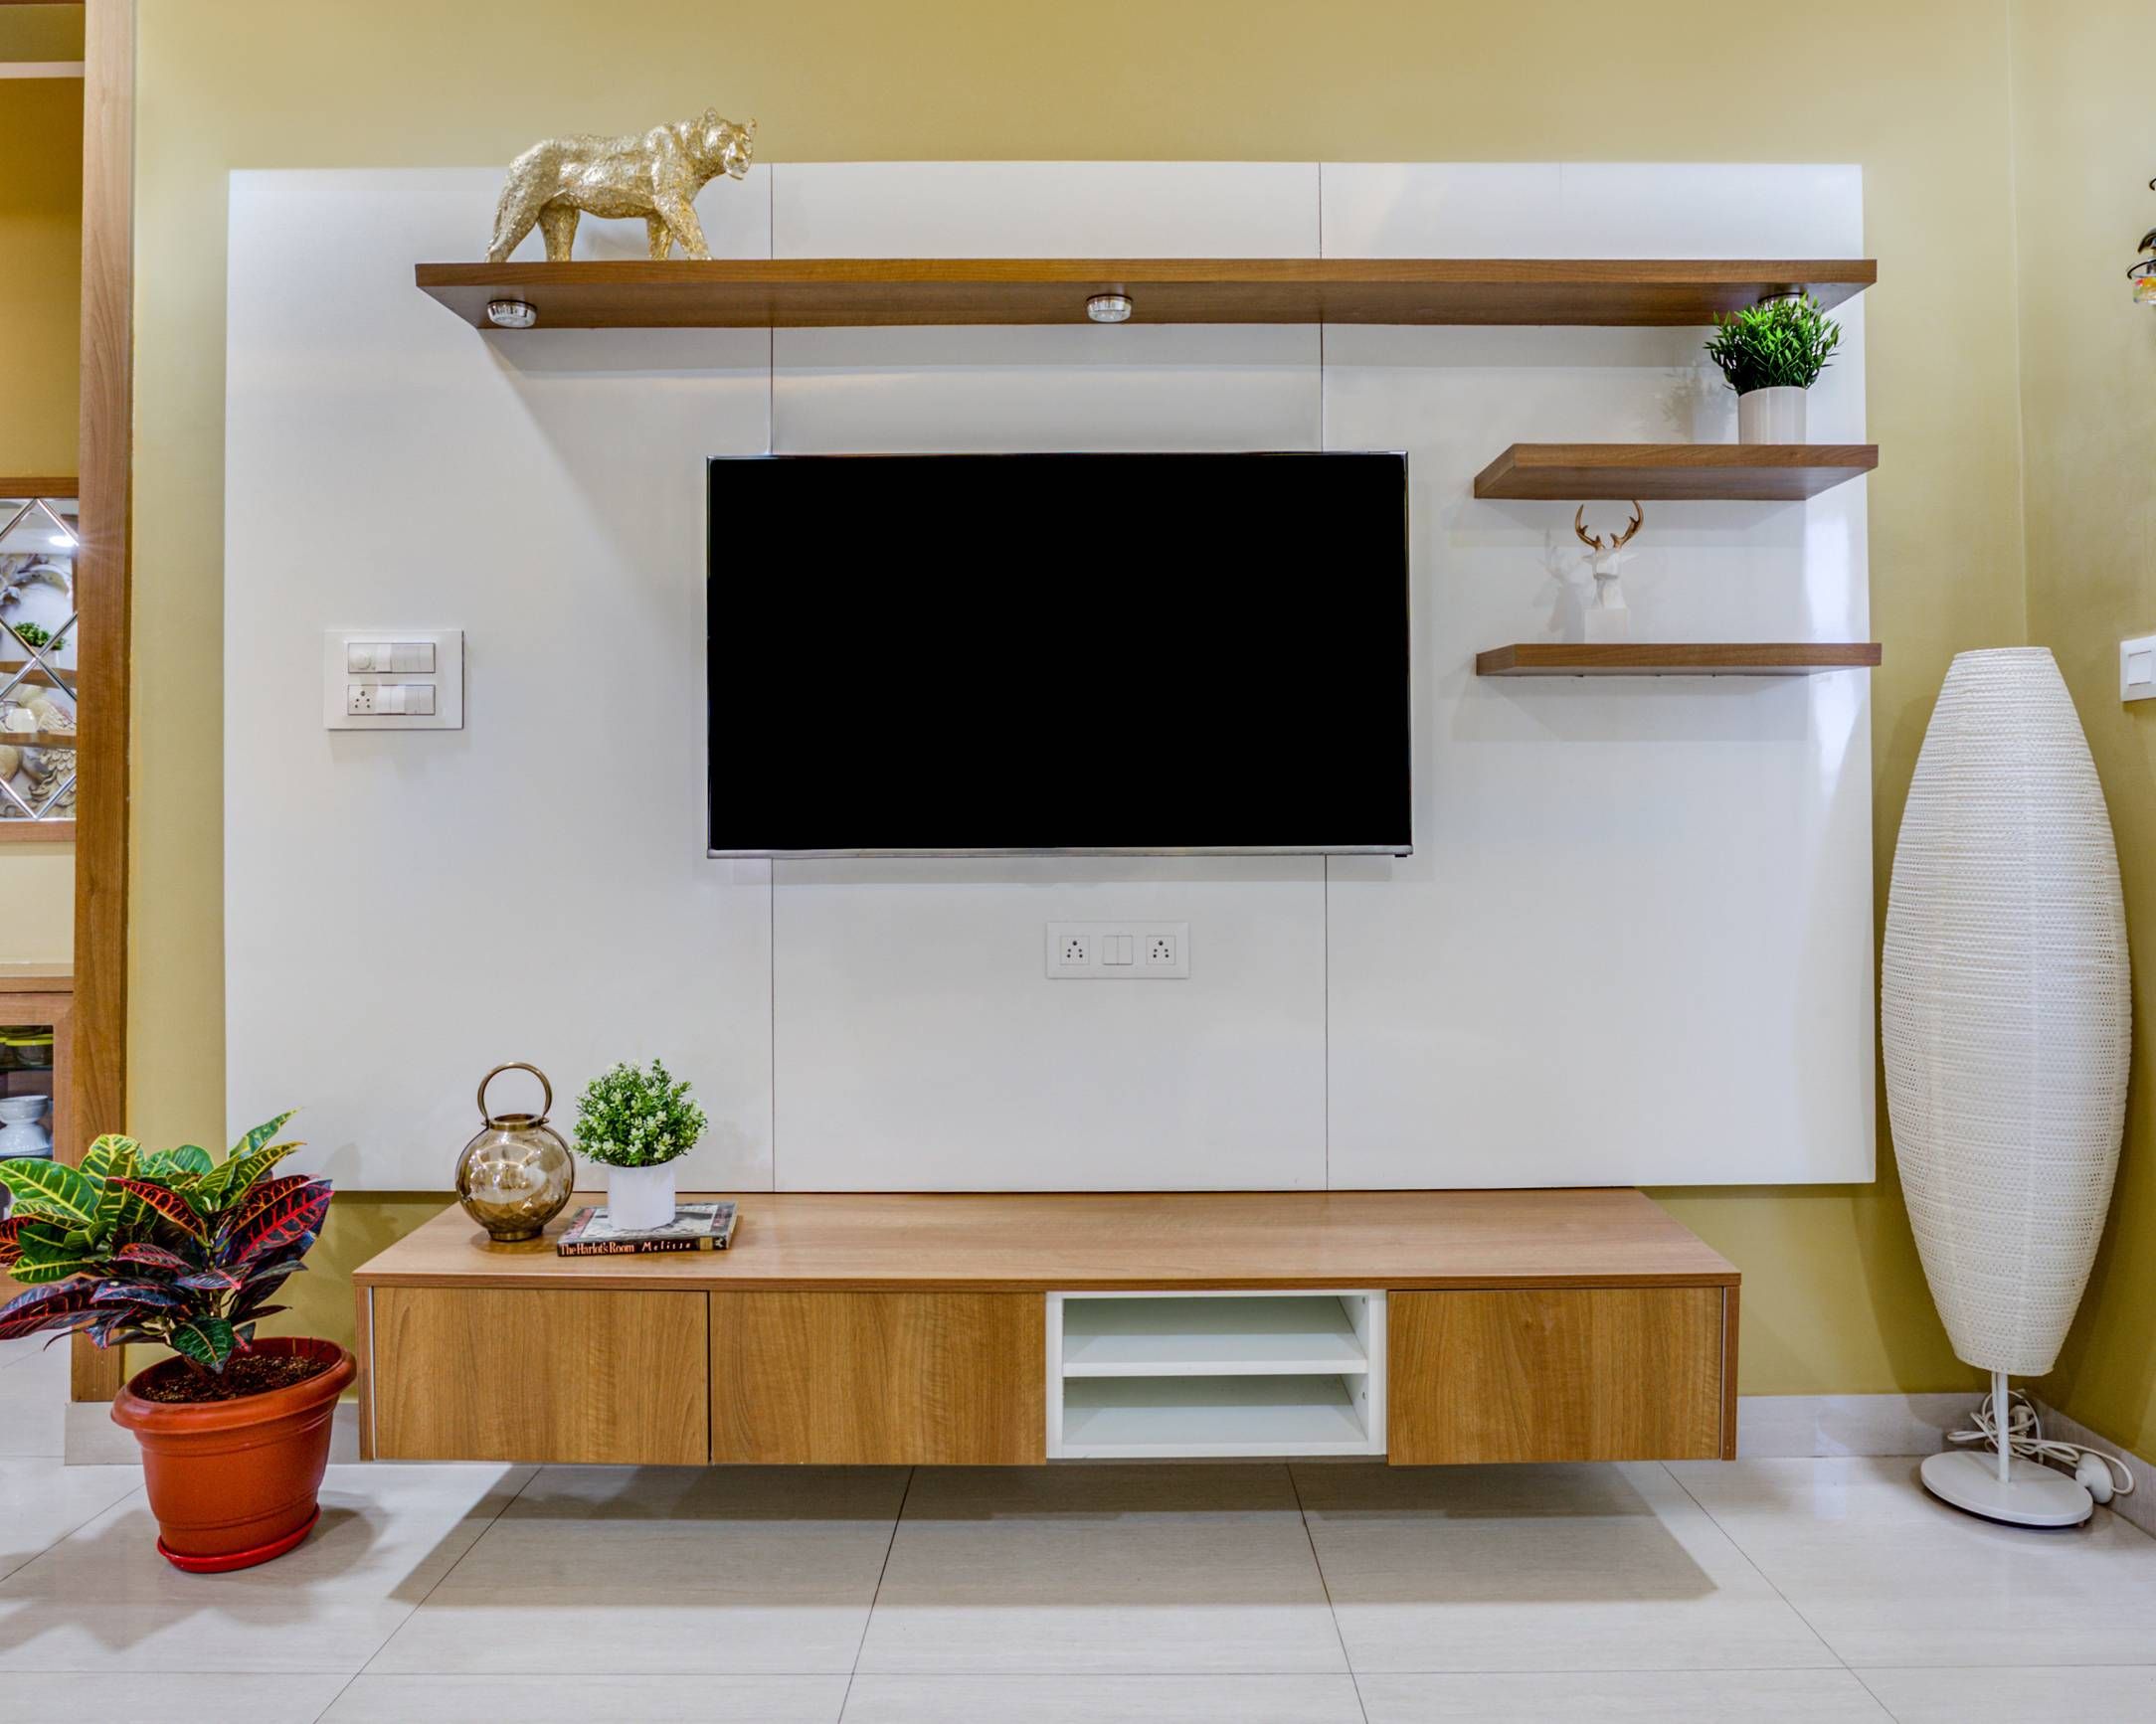 Modern TV Cabinet Design With A Wooden Laminate Finish